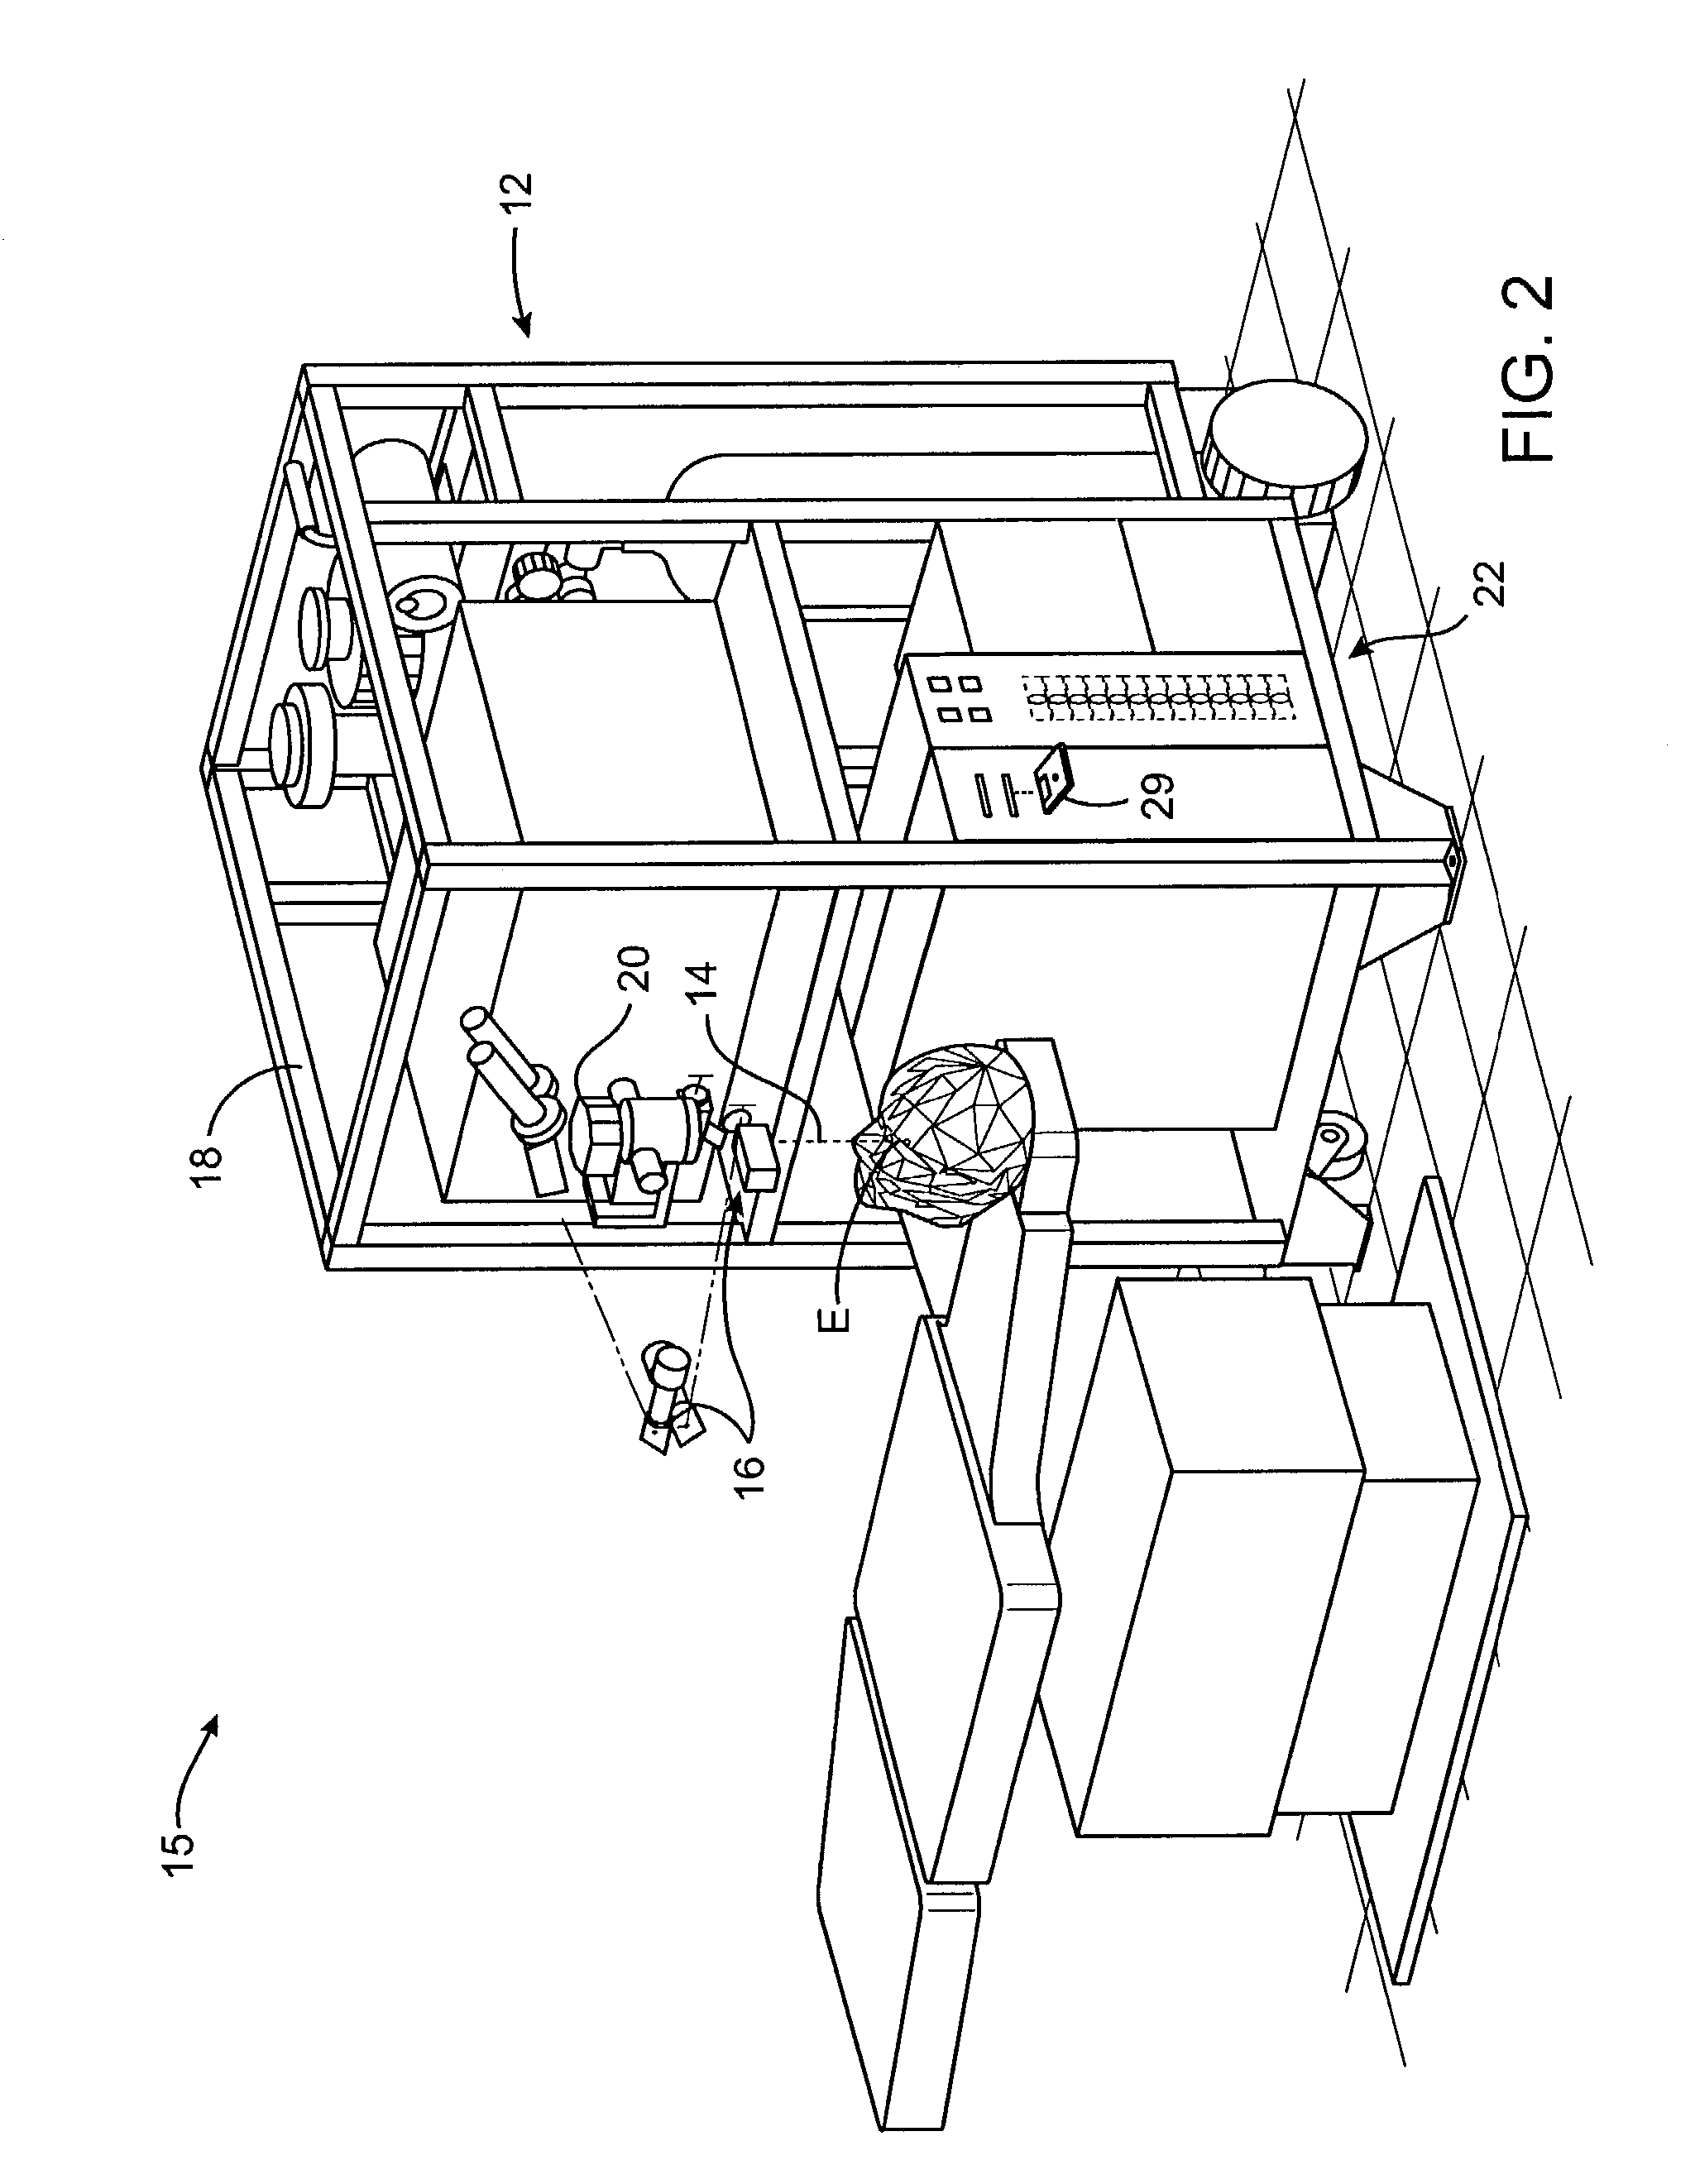 Methods and systems for tracking a torsional orientation and position of an eye